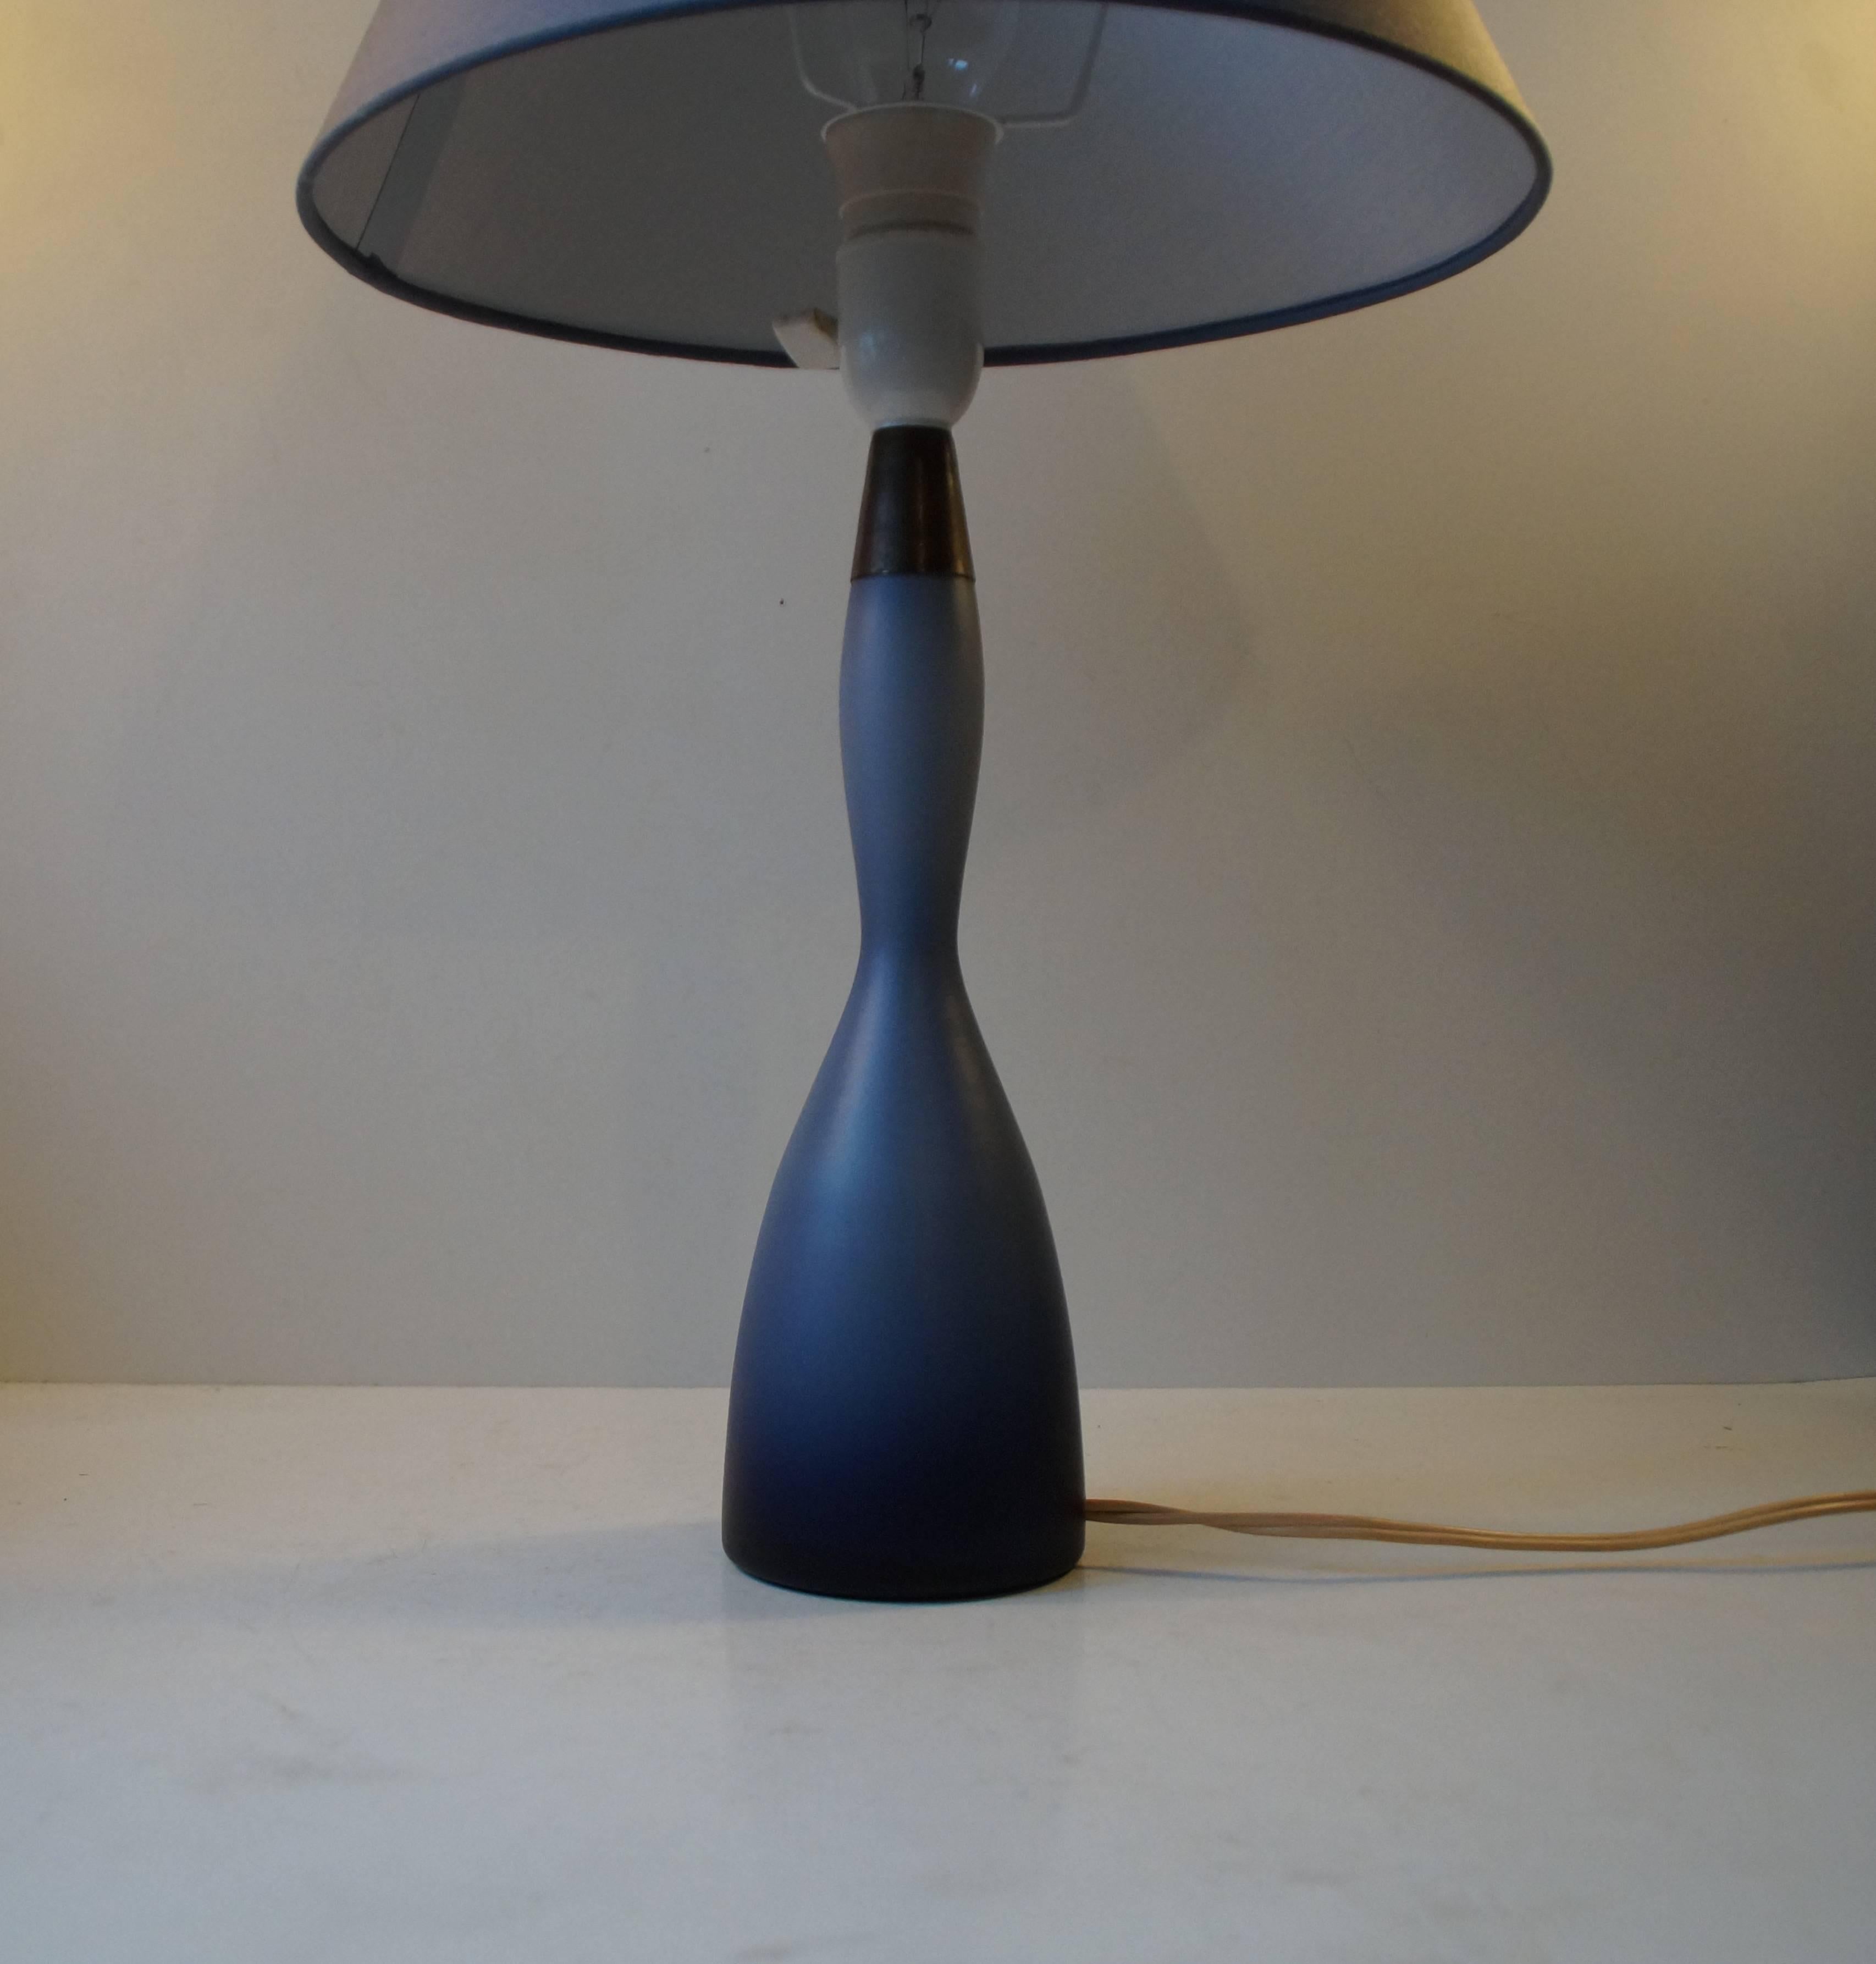 Beautiful organically shaped table lamp designed by Bent Nordsted in 1959. Mint condition. Measurements: 14 inches (35 cm) without shade.